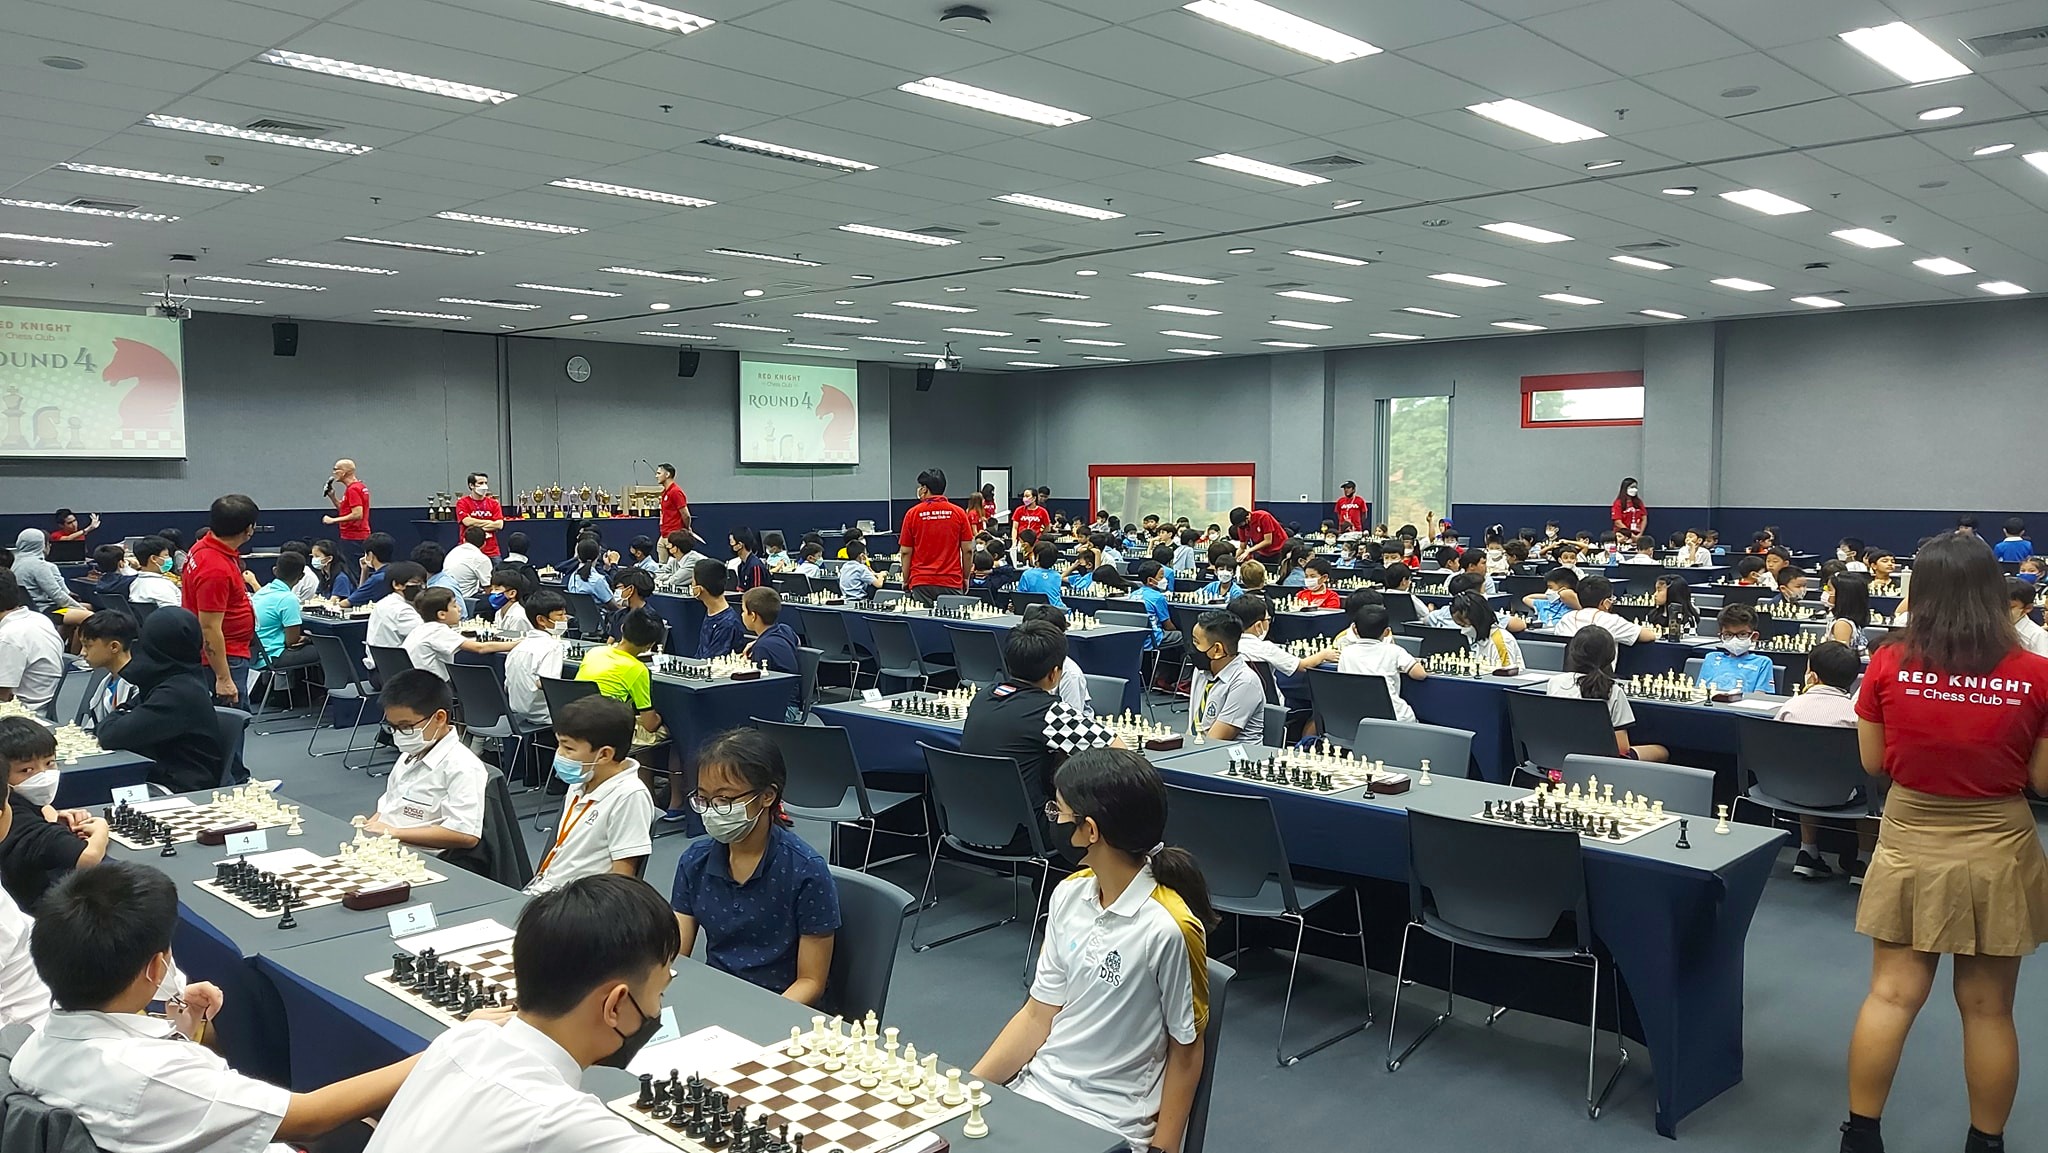 Big Rook Chess Academy - Bangkok - Last day for early bird rate today for  this Sunday's ( Oct. 4, 2020) U1300 FIDE Rated Rapid Big Rook Event! visit  www.bigrookchess.com #only a